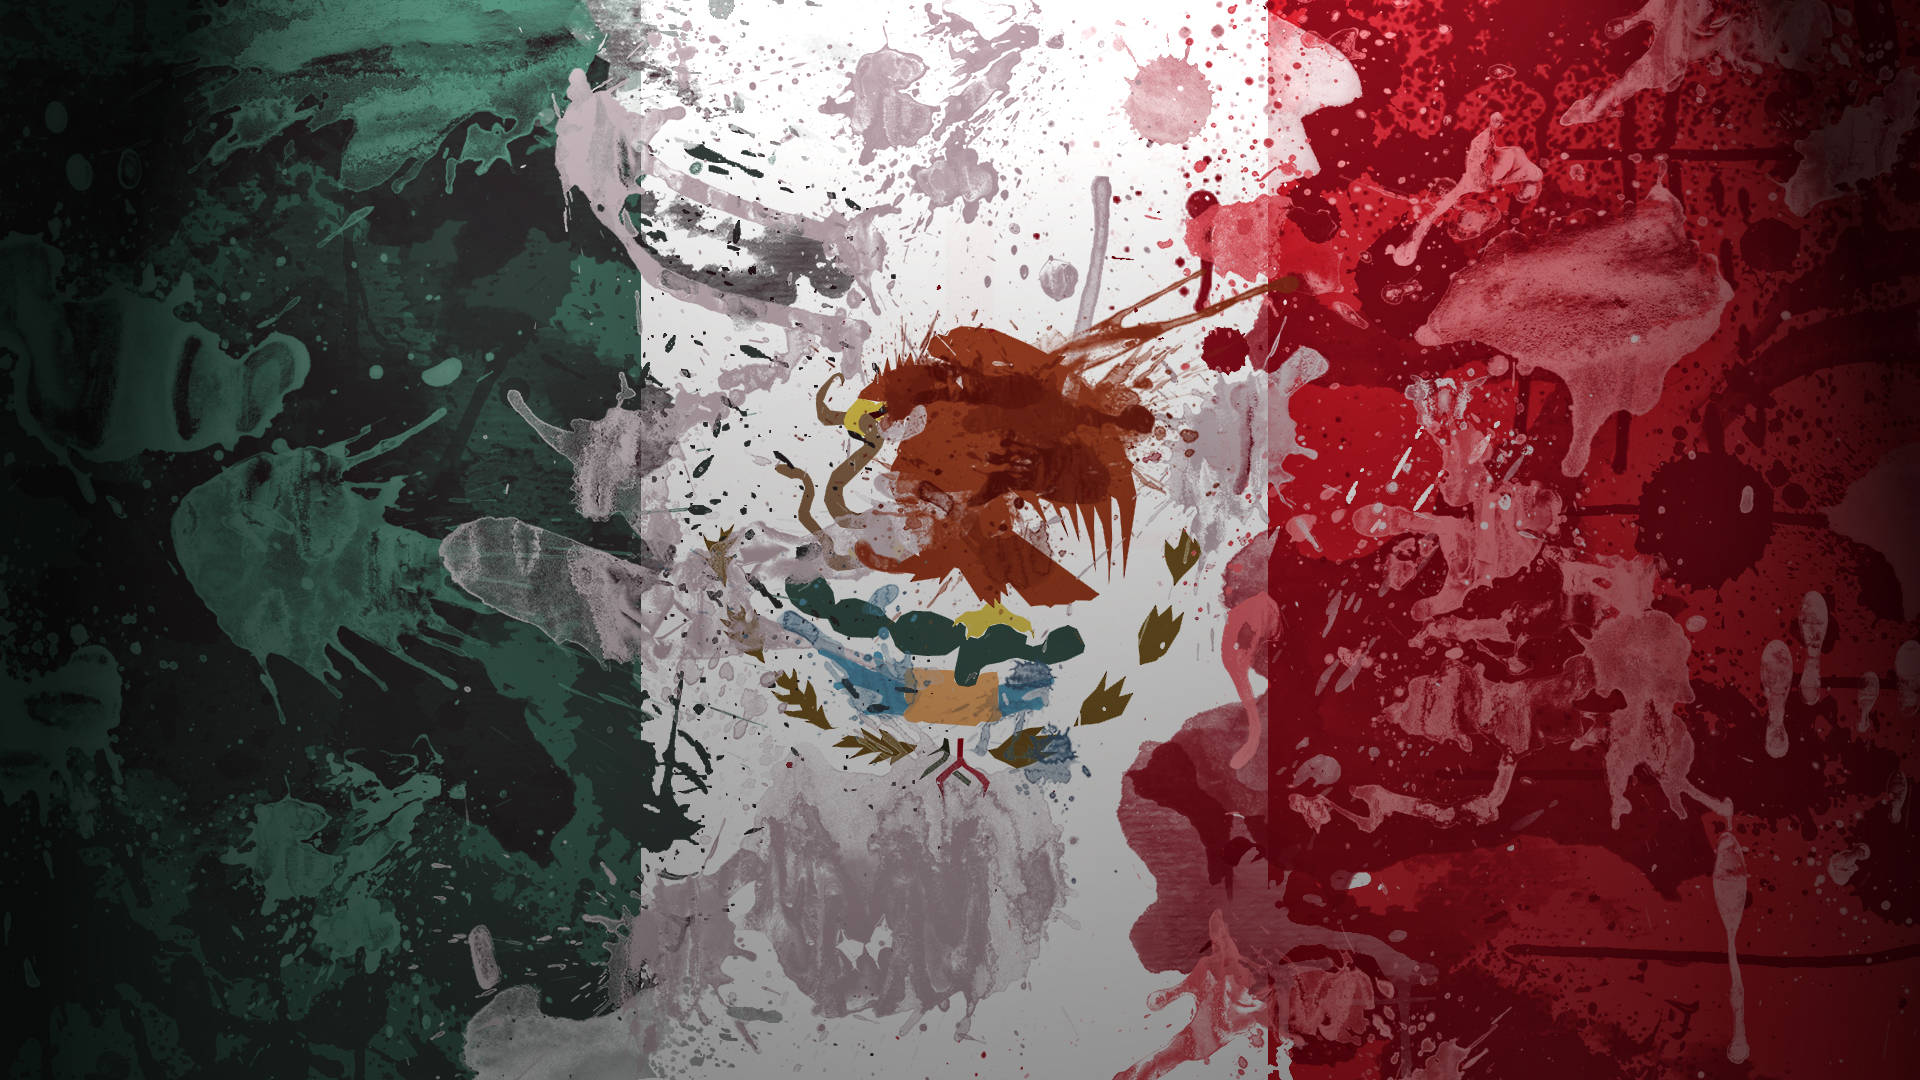 Chicano Mexican Flag Background